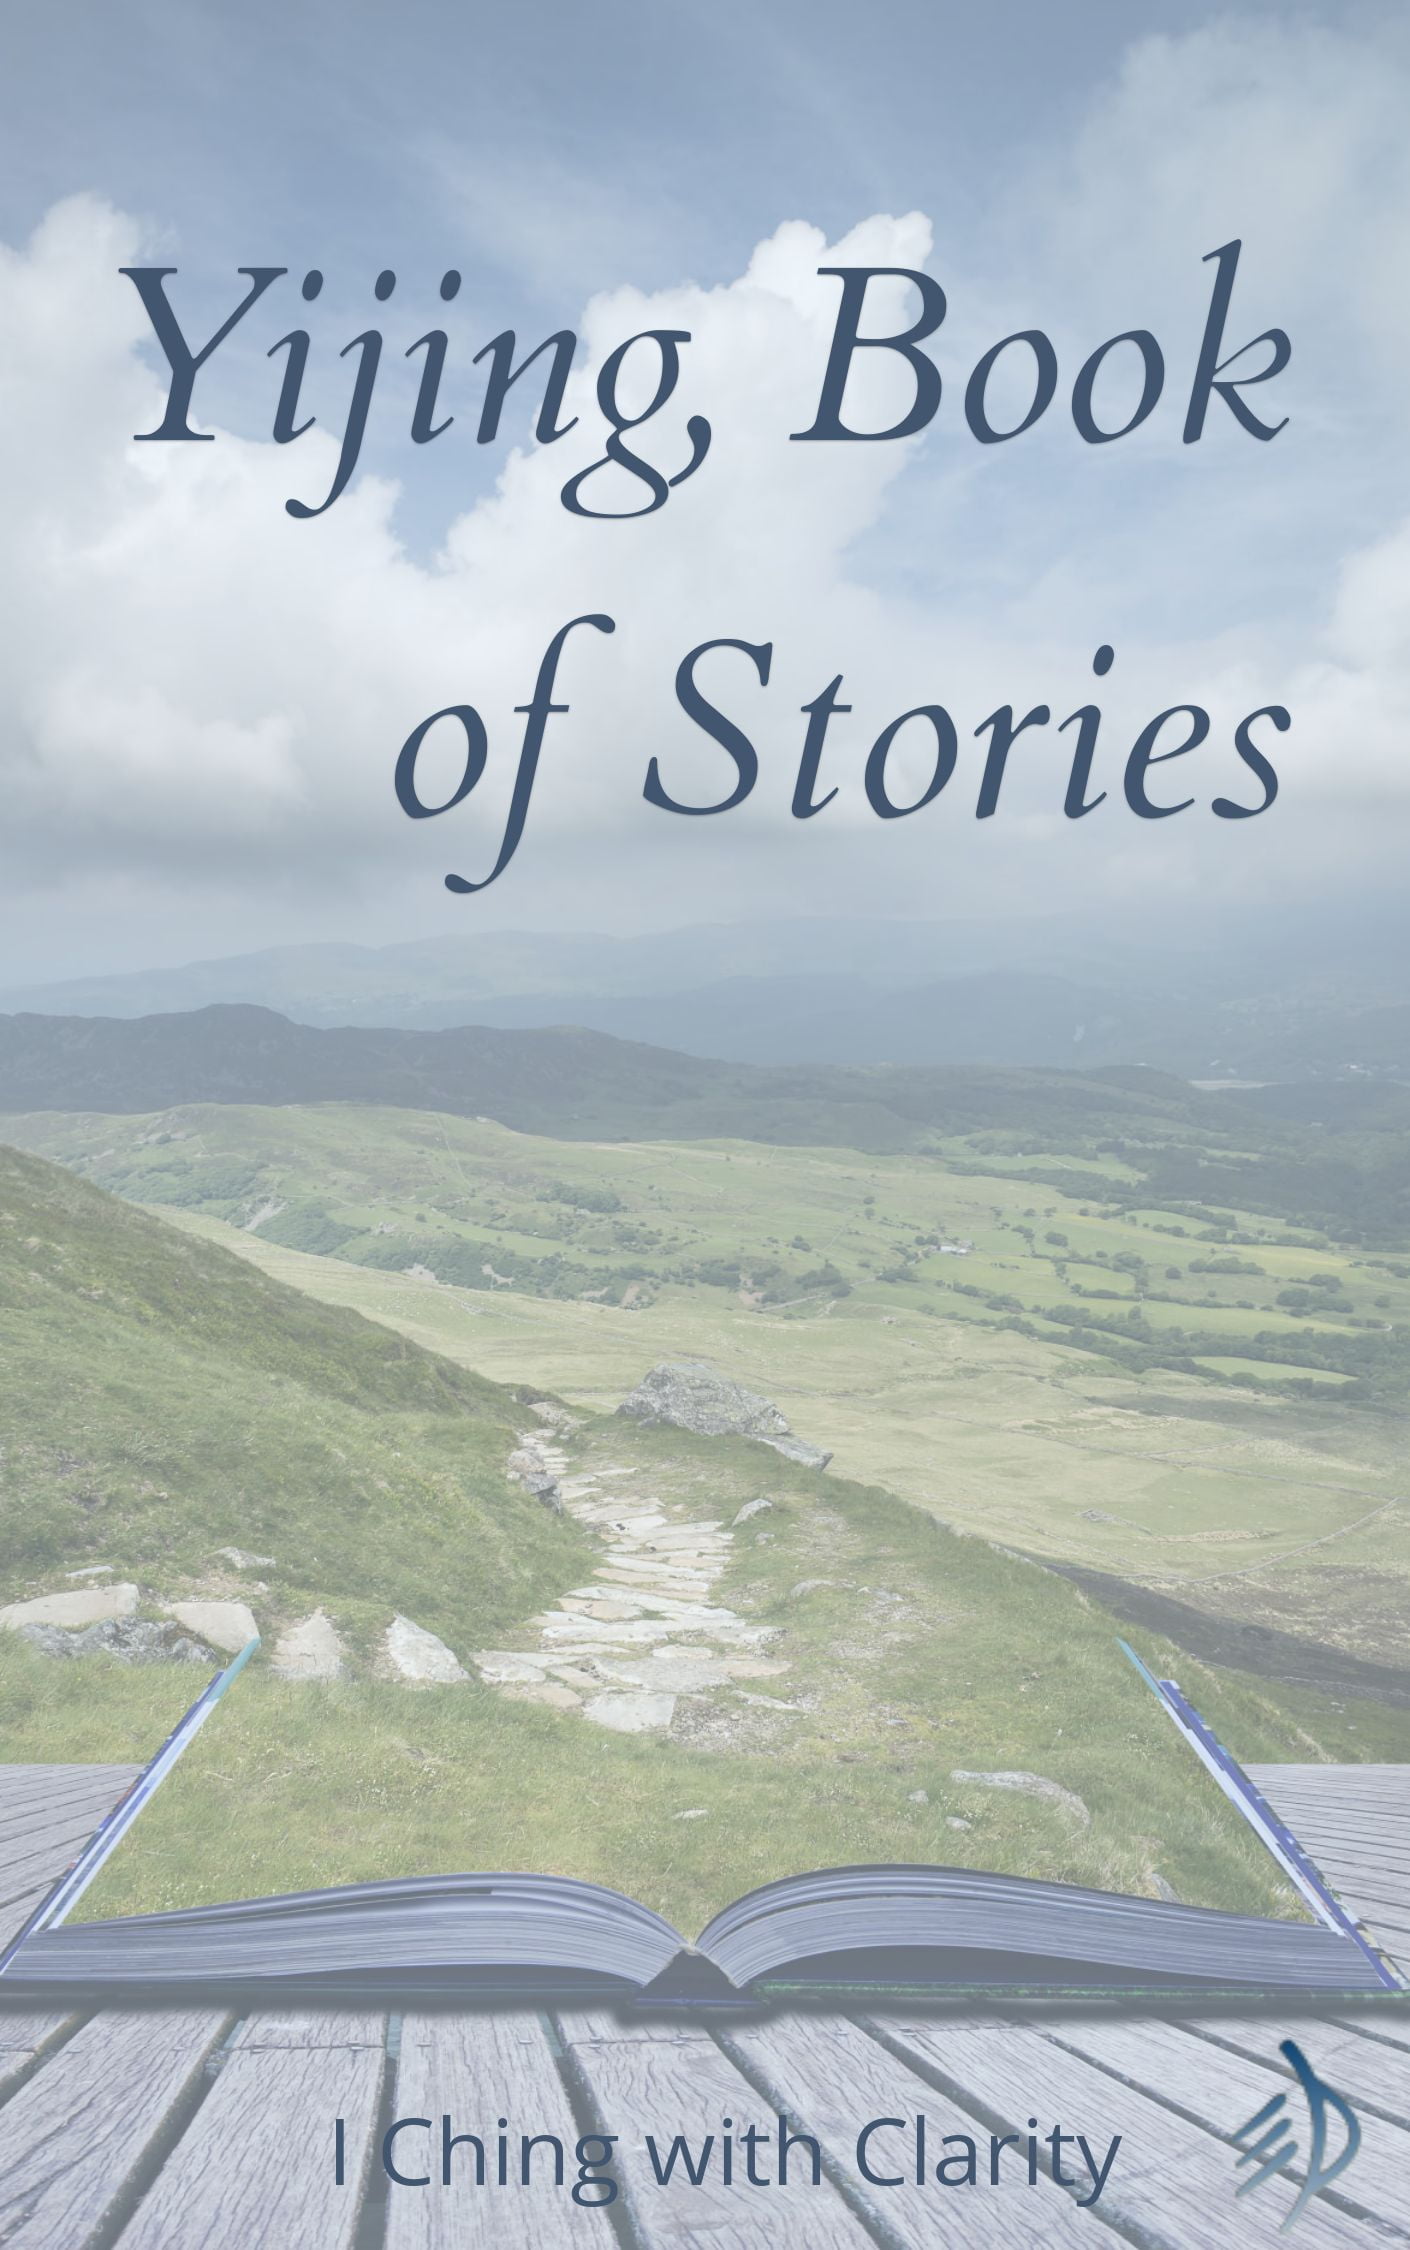 Book of Stories ebook cover